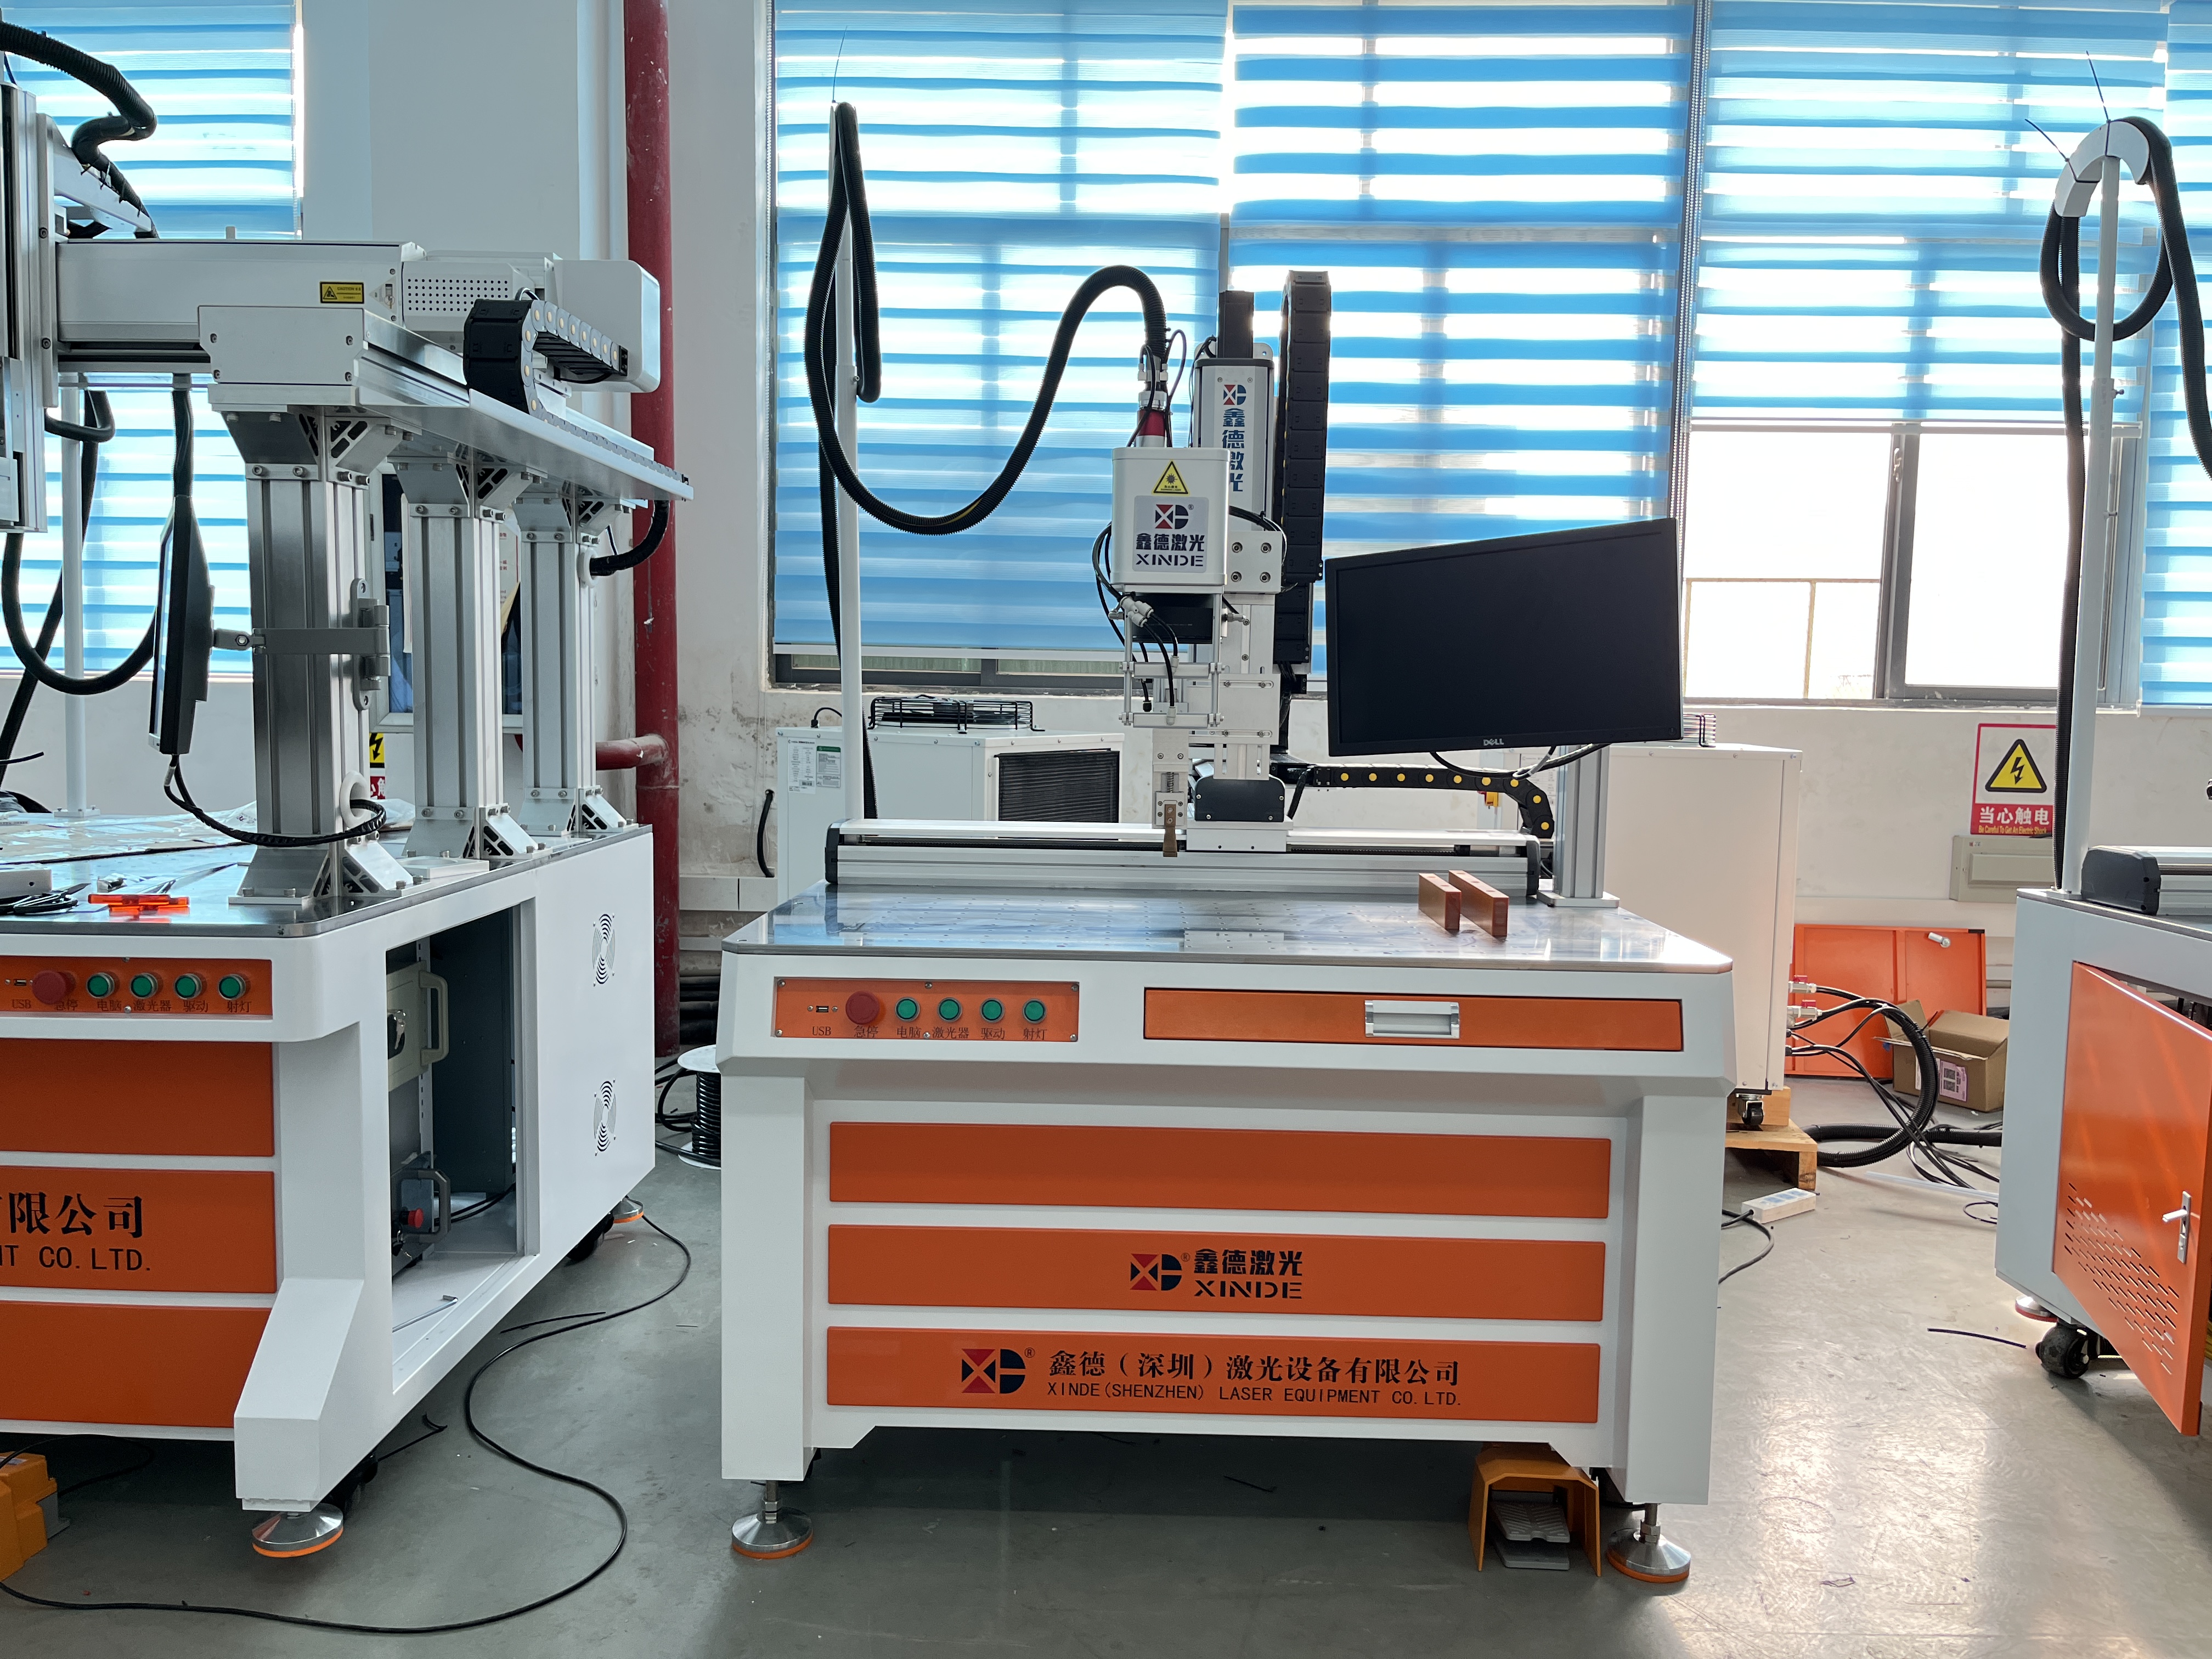 How much is the price of lithium battery laser welding machine